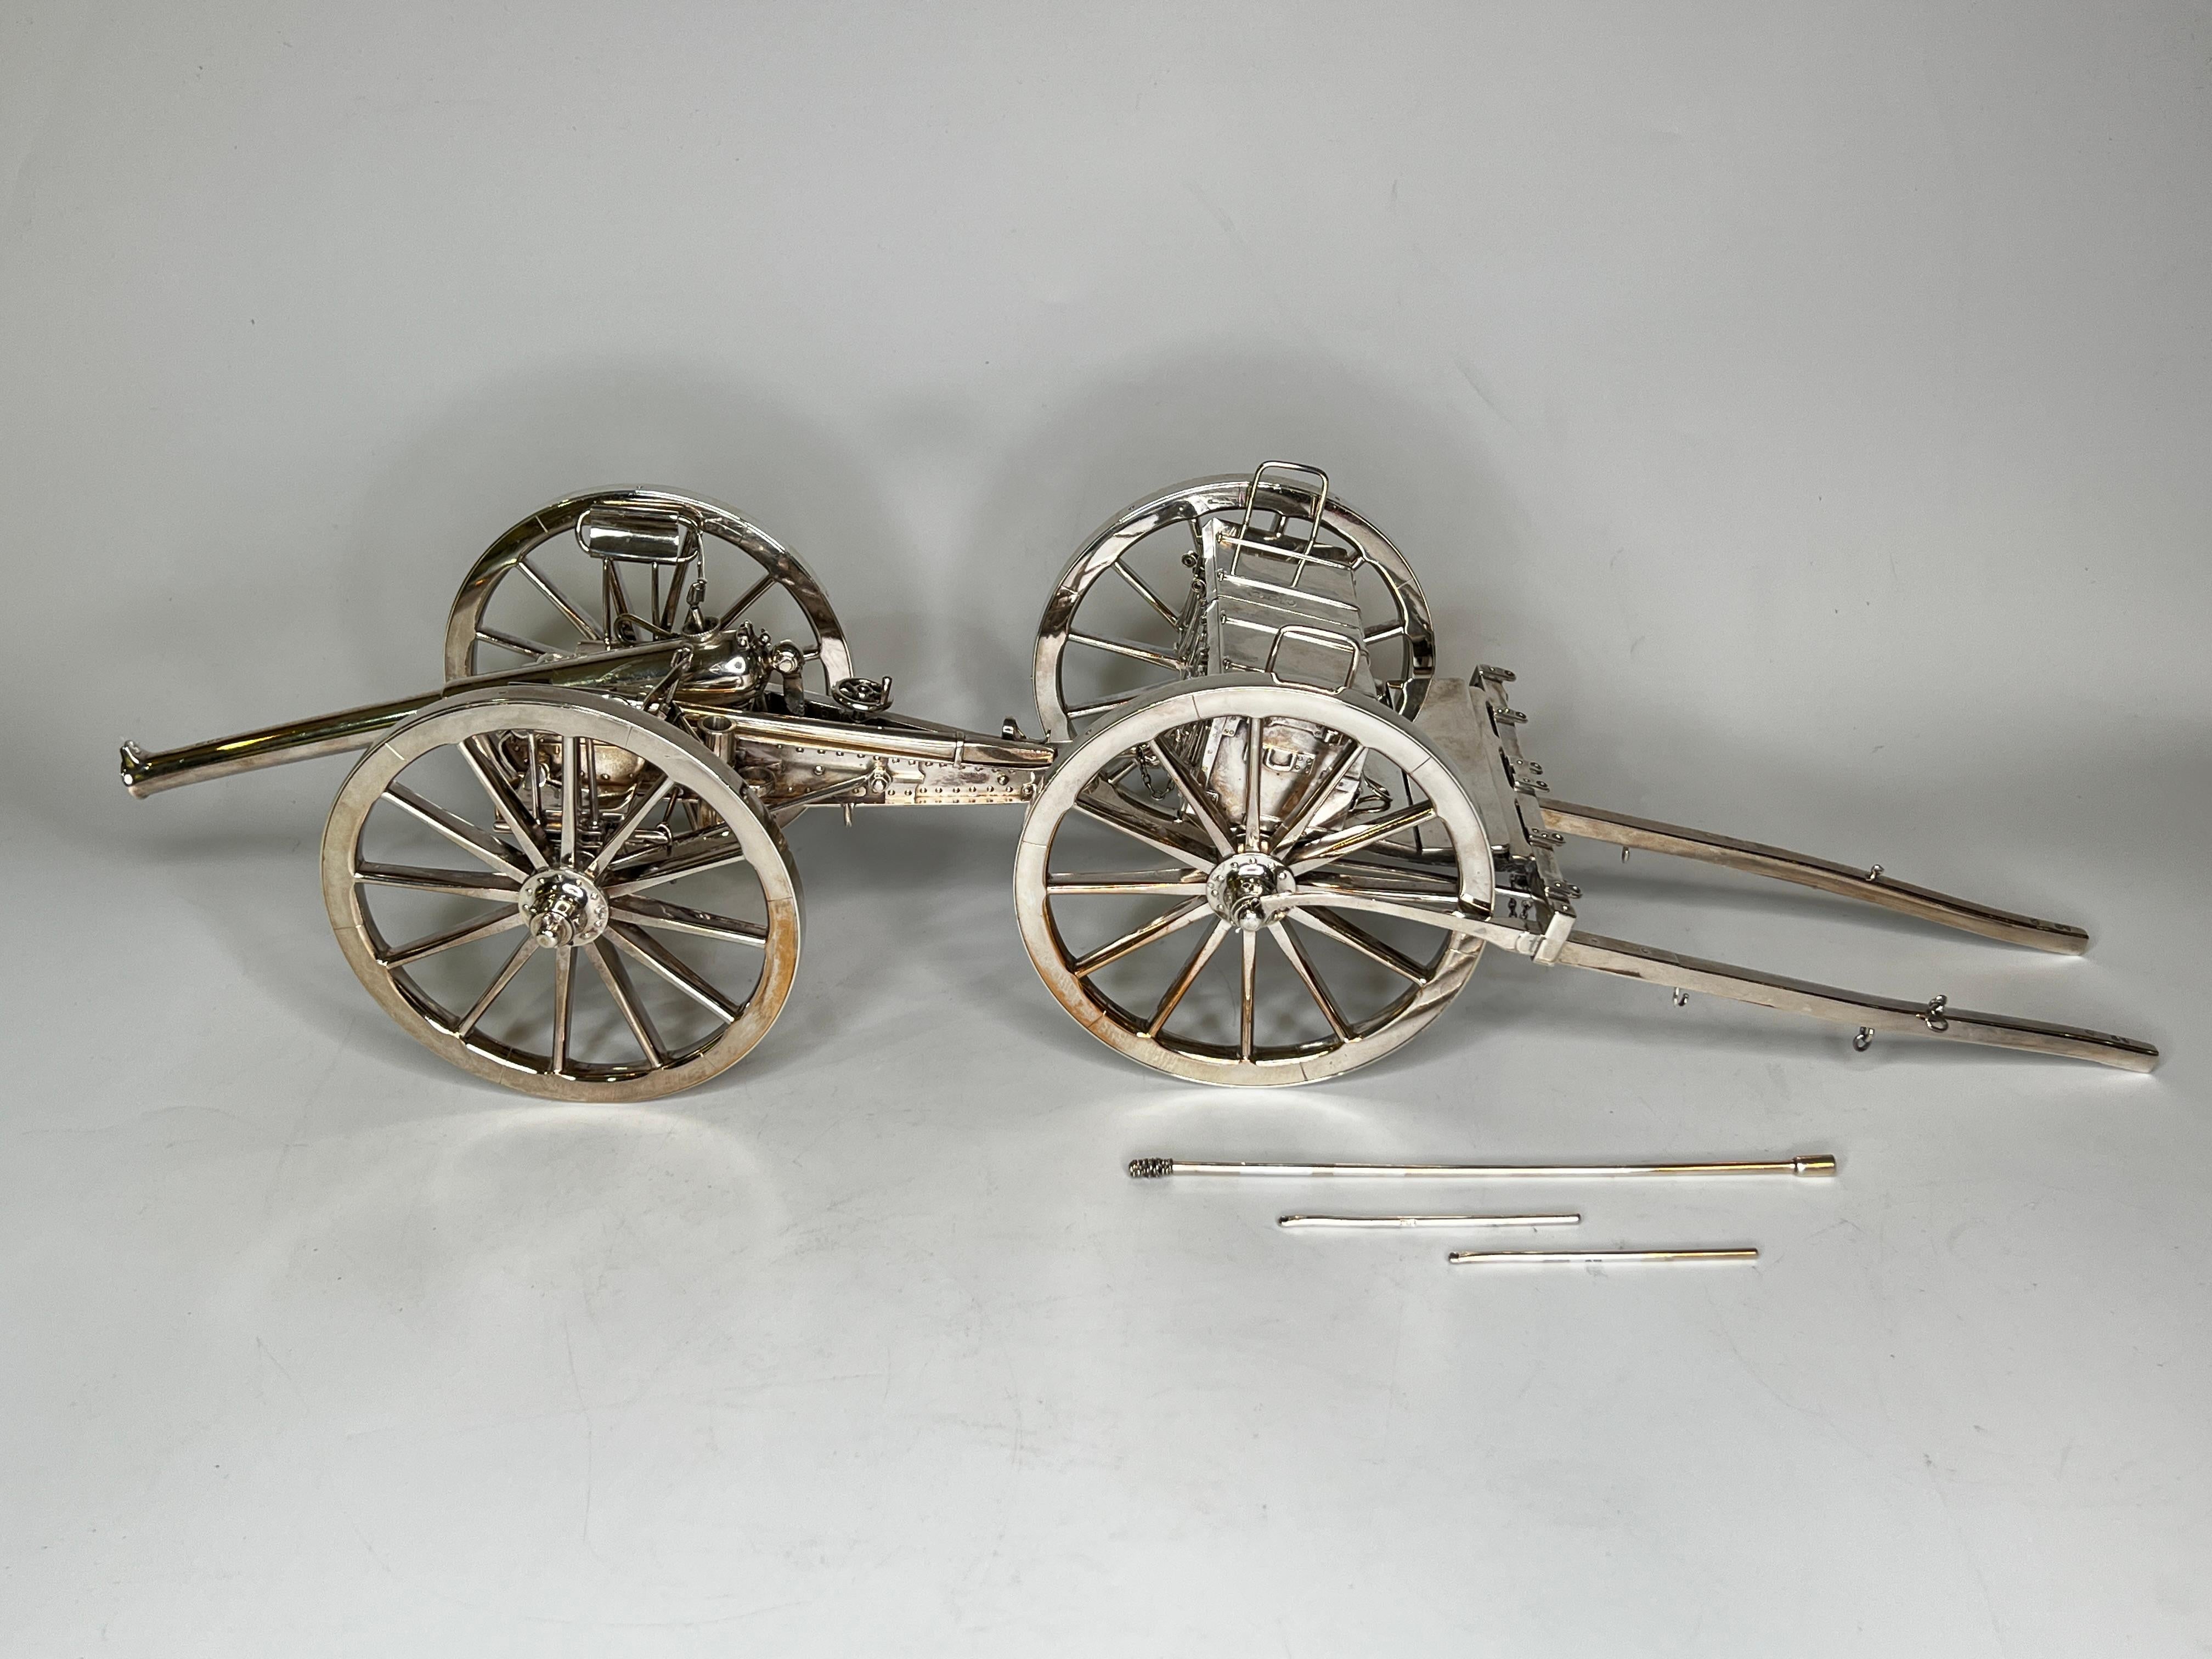 Our wonderful sterling lighter in the form of a gun carriage comprising cannon on cart and limber was made by the London silversmiths, William Gibson and John Lawrence Langman in 1893.

The finest example of its kind we have seen in decades, in